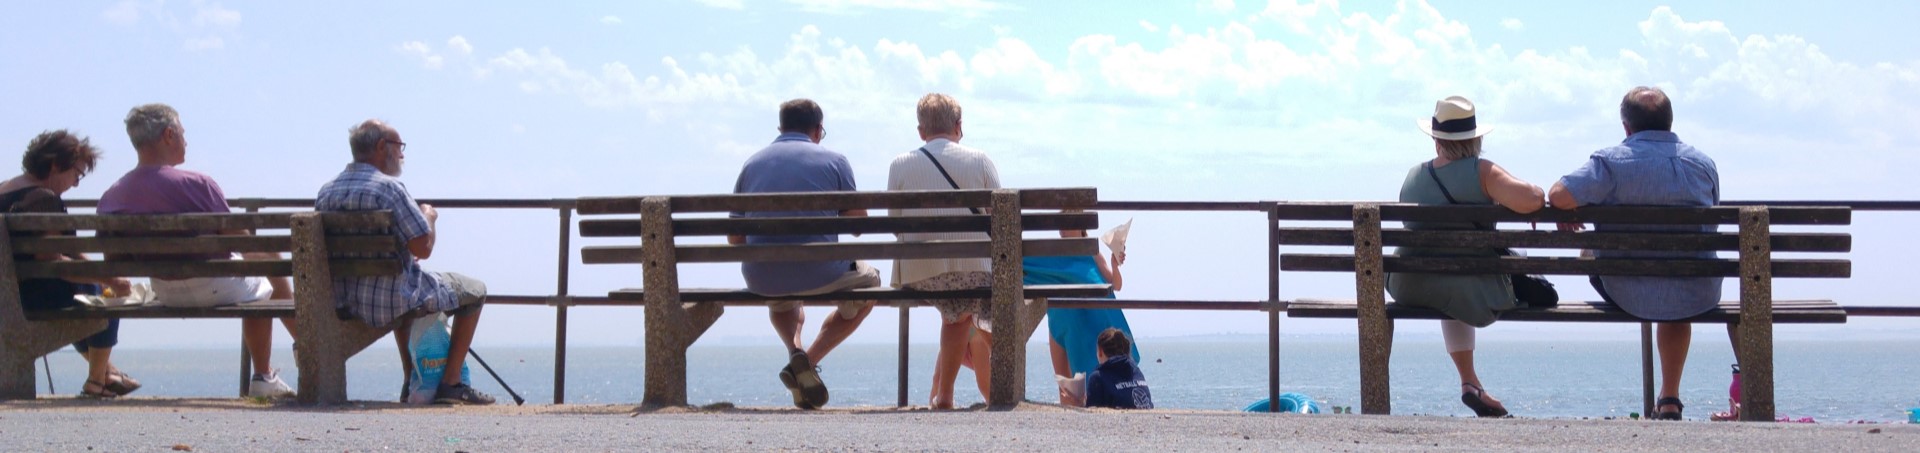 People sitting on benches overlooking the sea in Old Leigh.